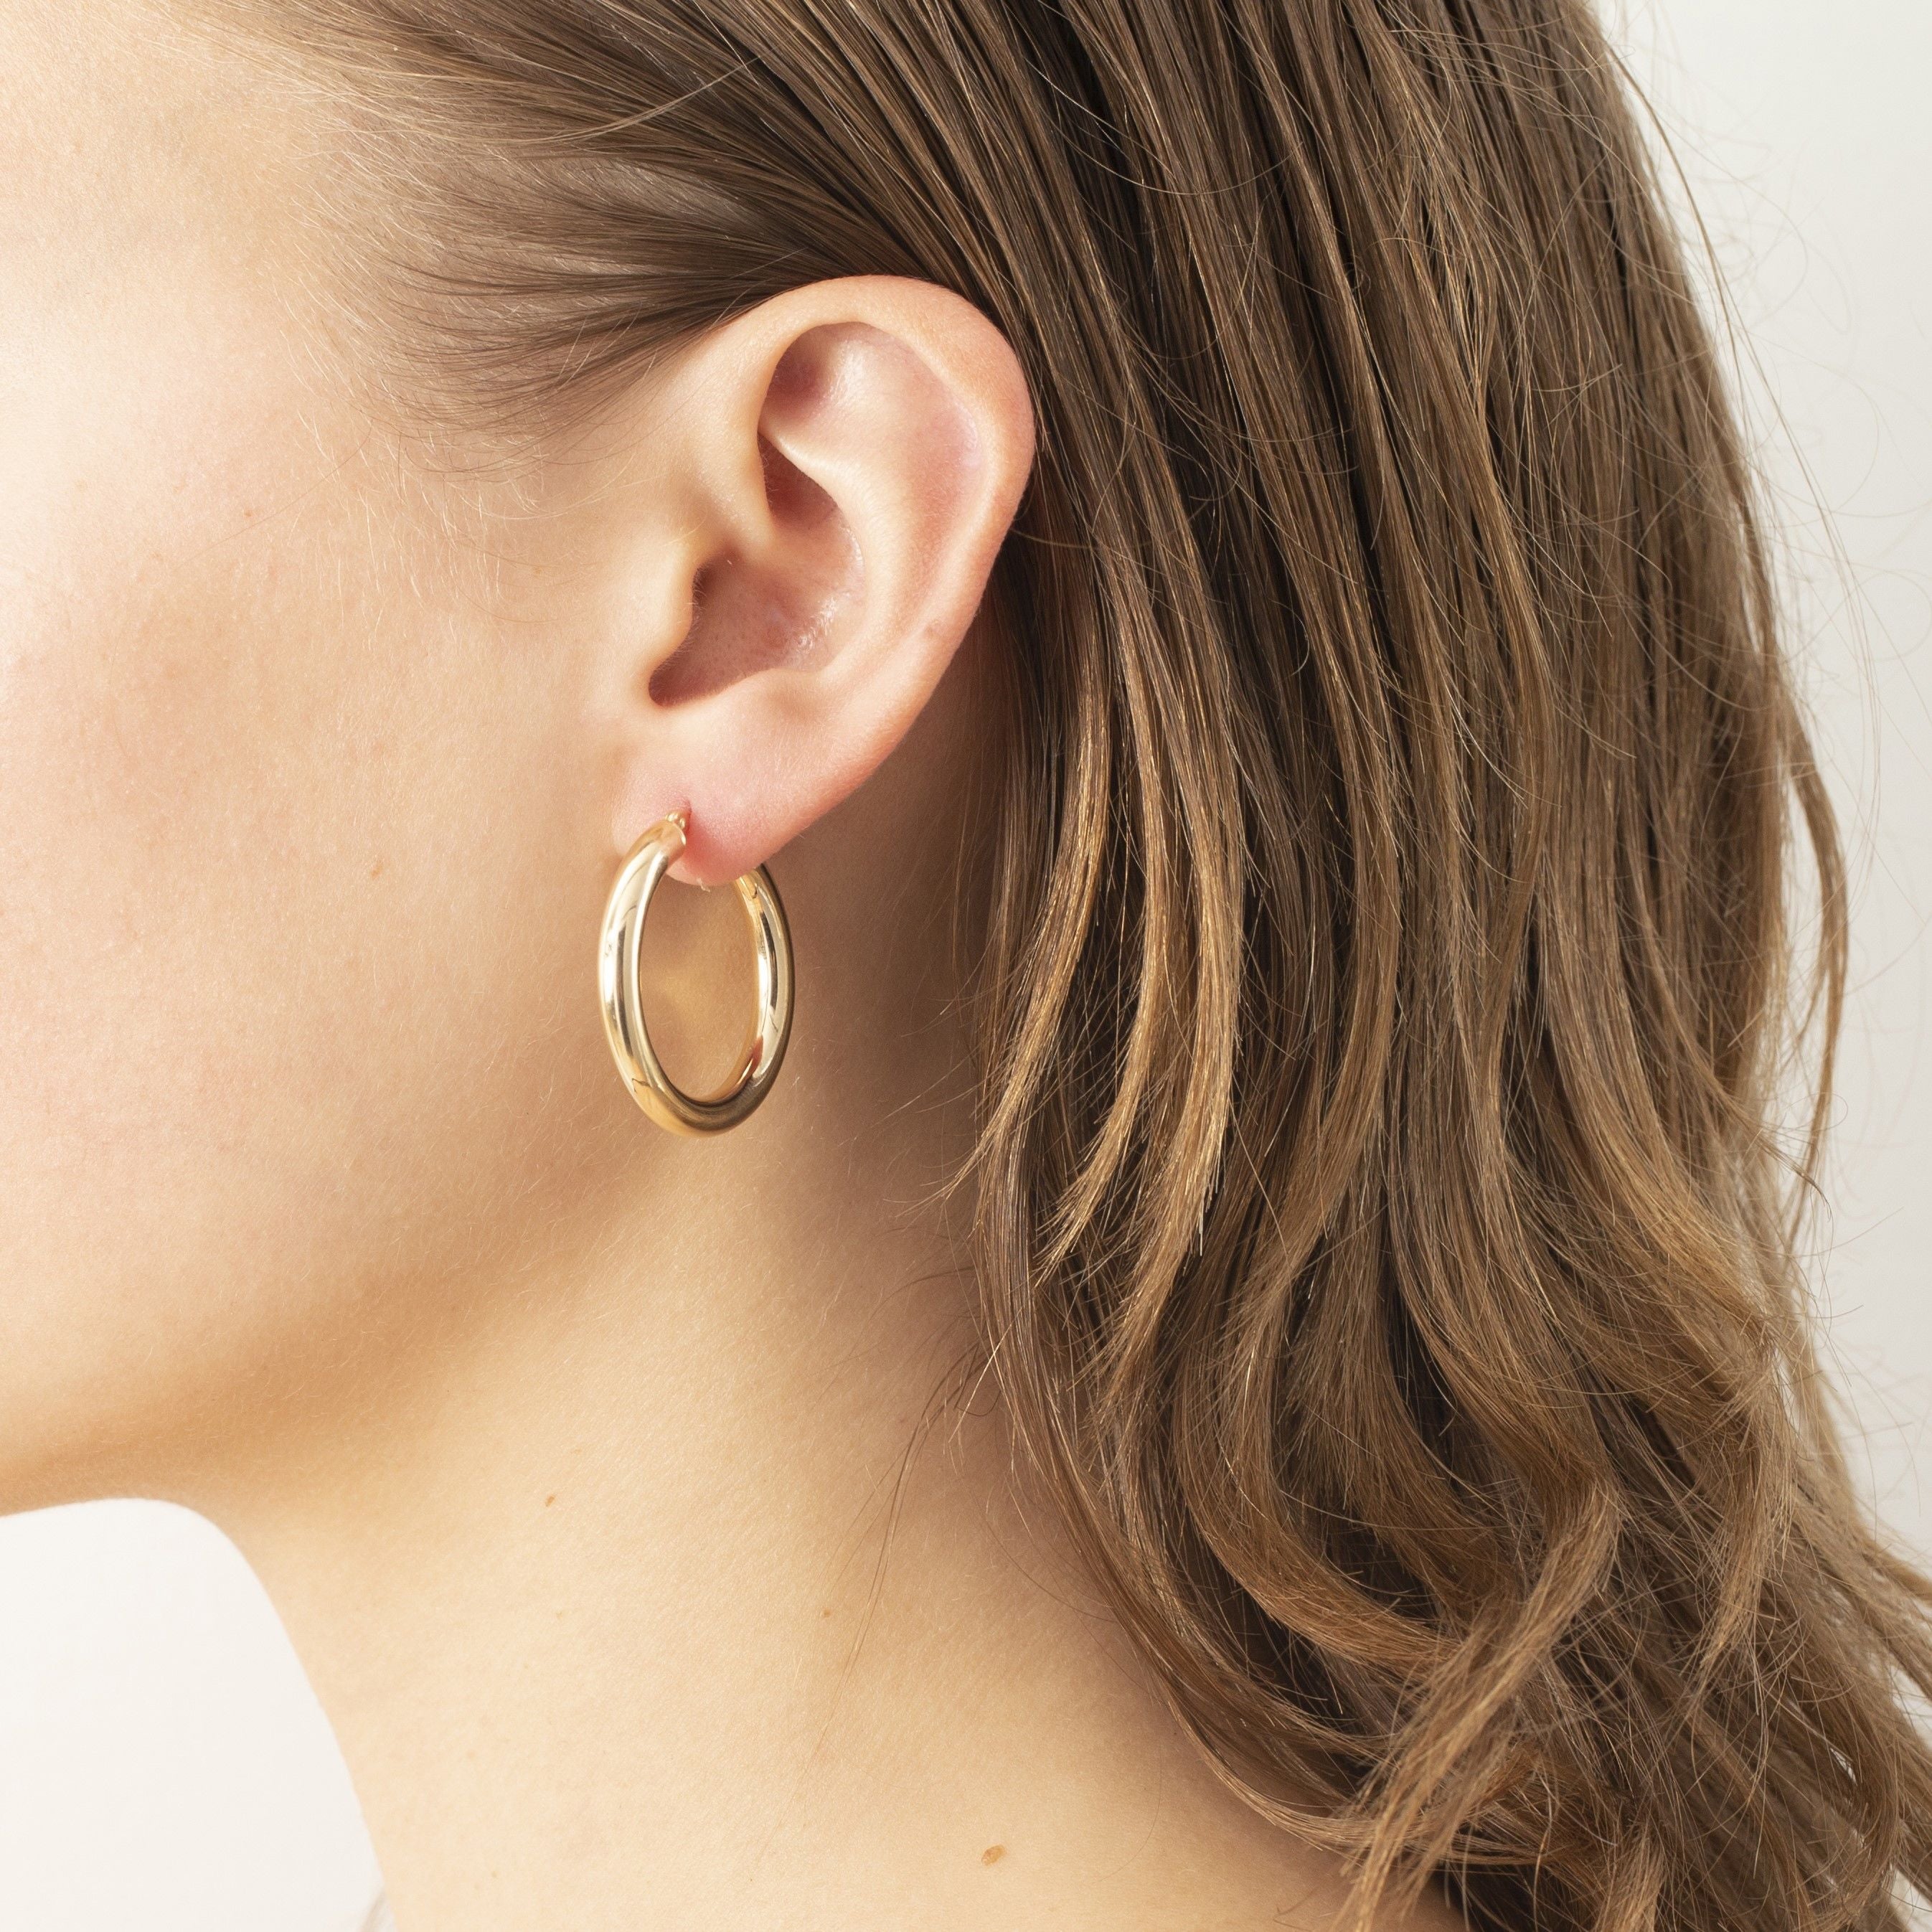 Thick 4 mm 14K Gold Polished Hoops 